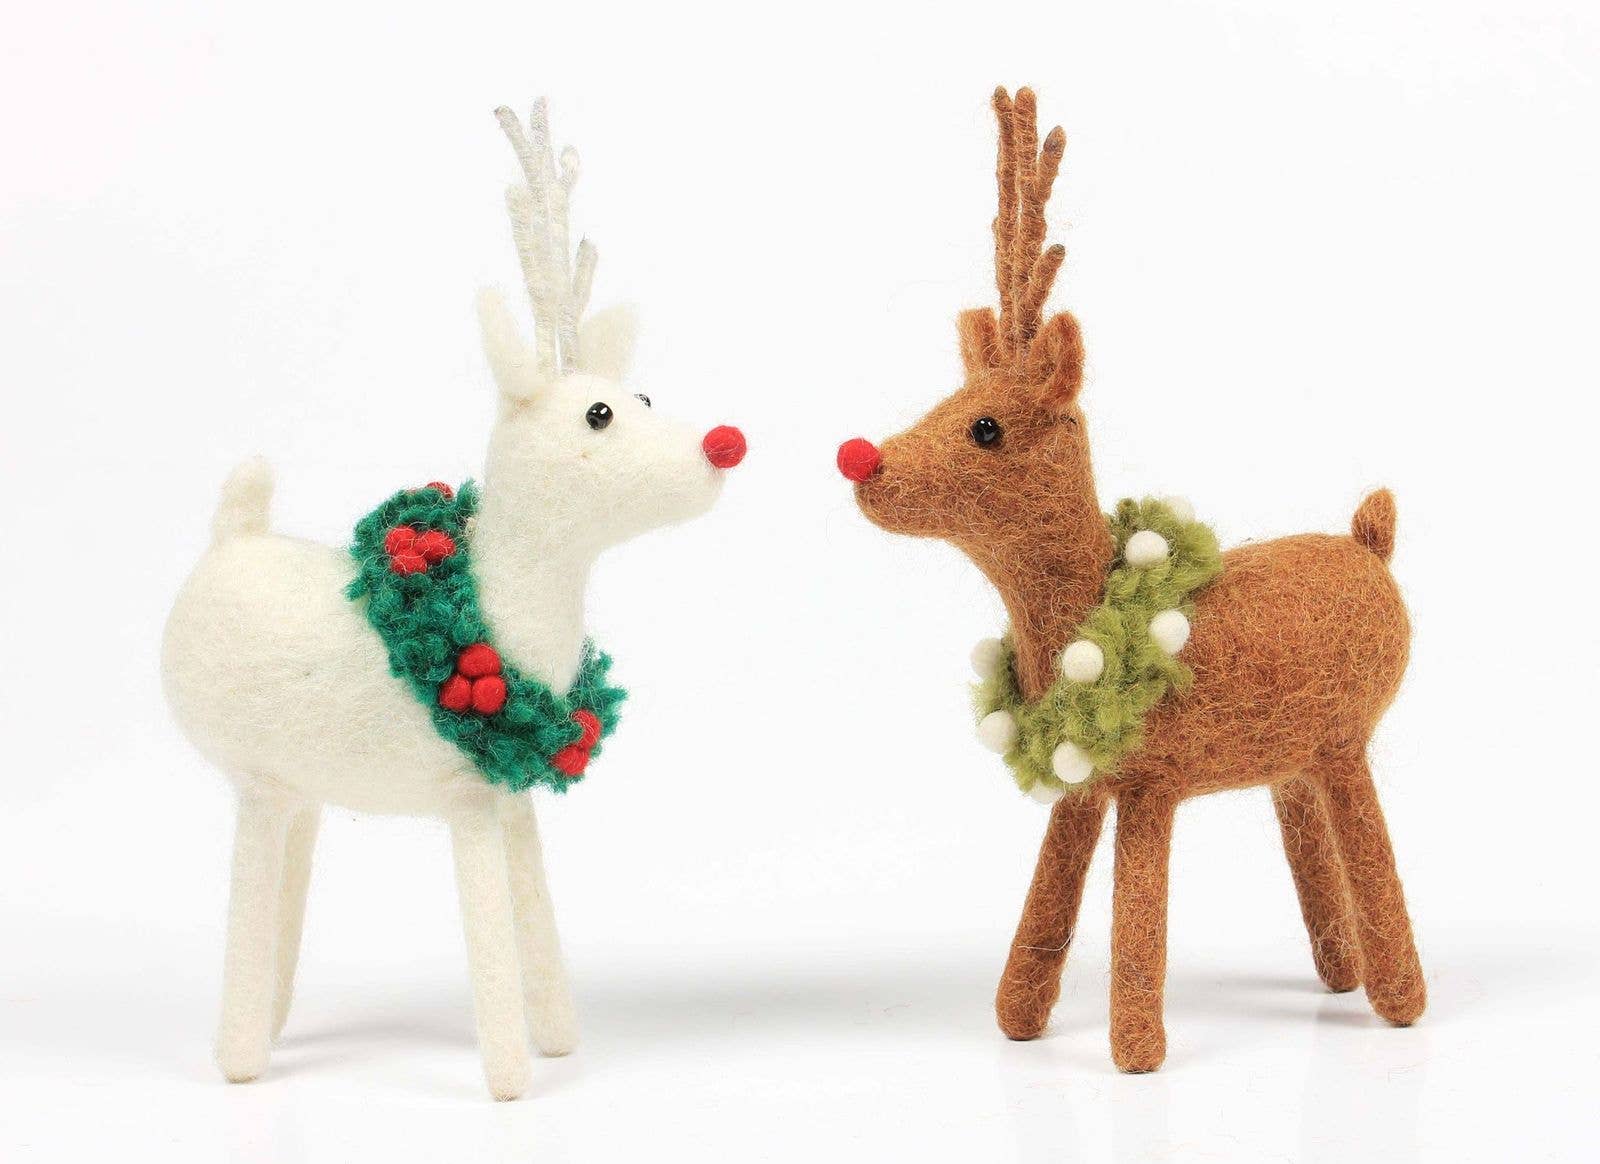 Reindeer with Mistletoe and Holly Weaths